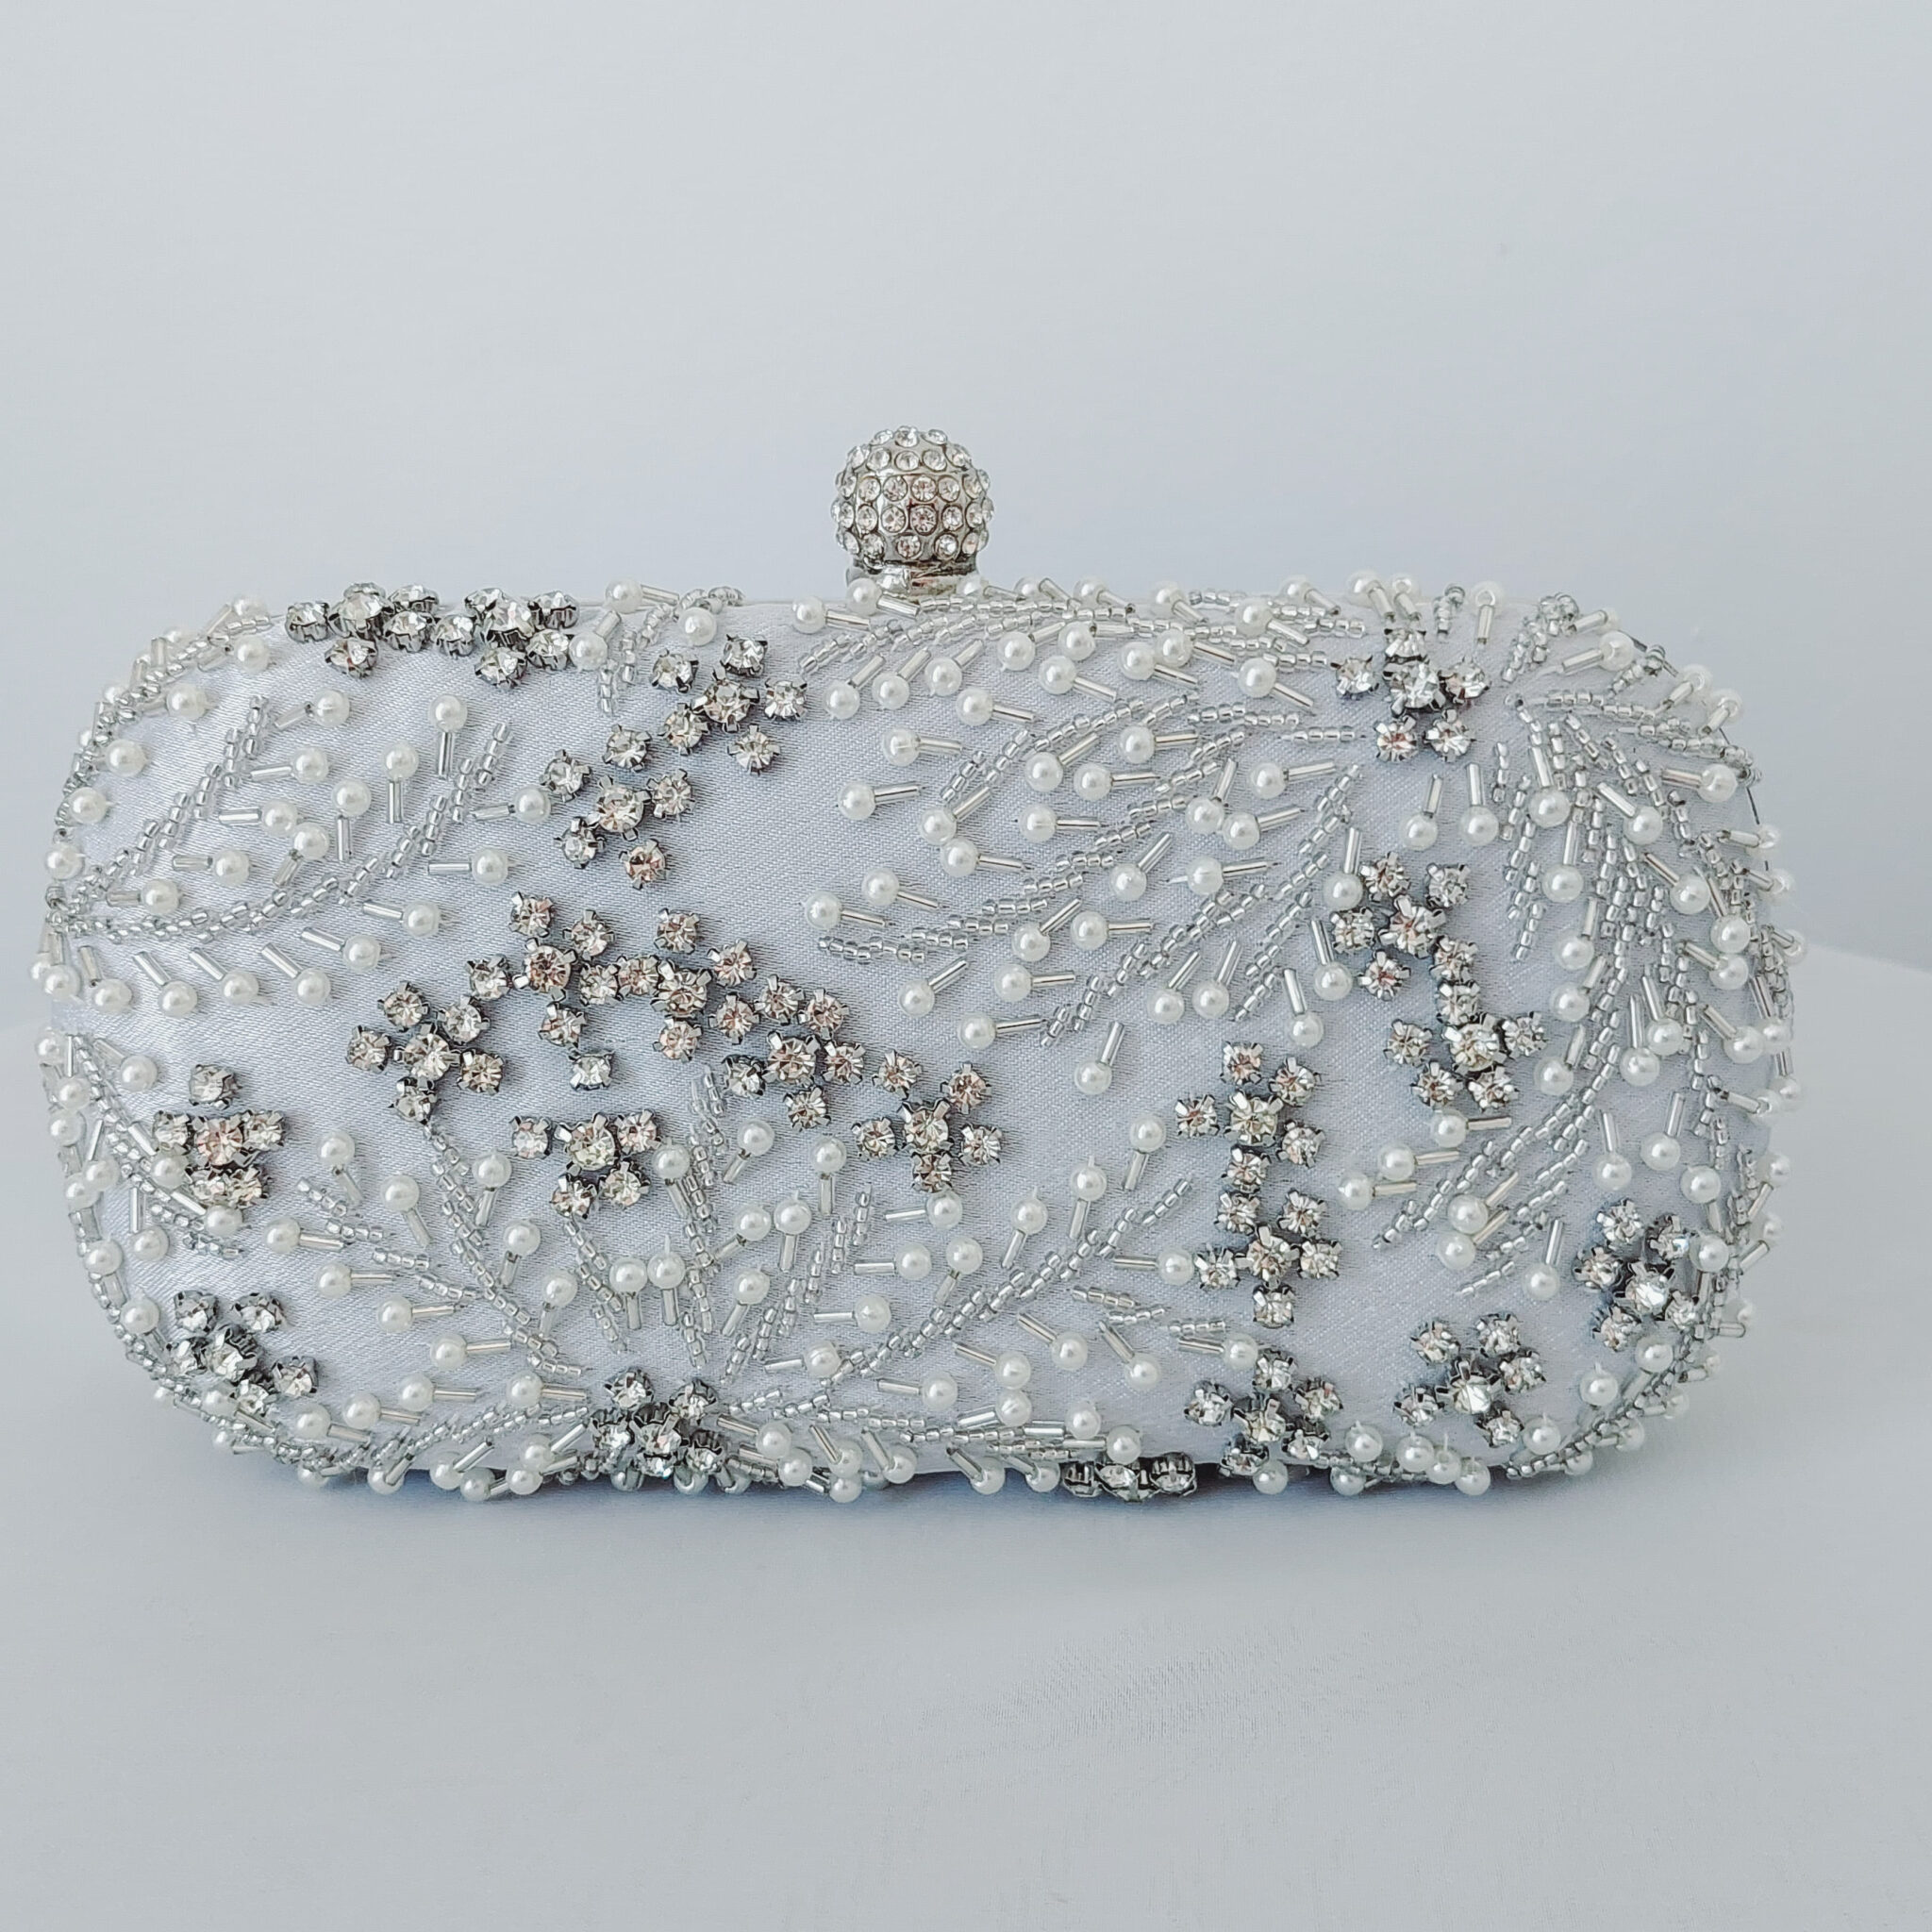 Venice Silver Crystal Beaded Bridal Clutch - Little White Couture